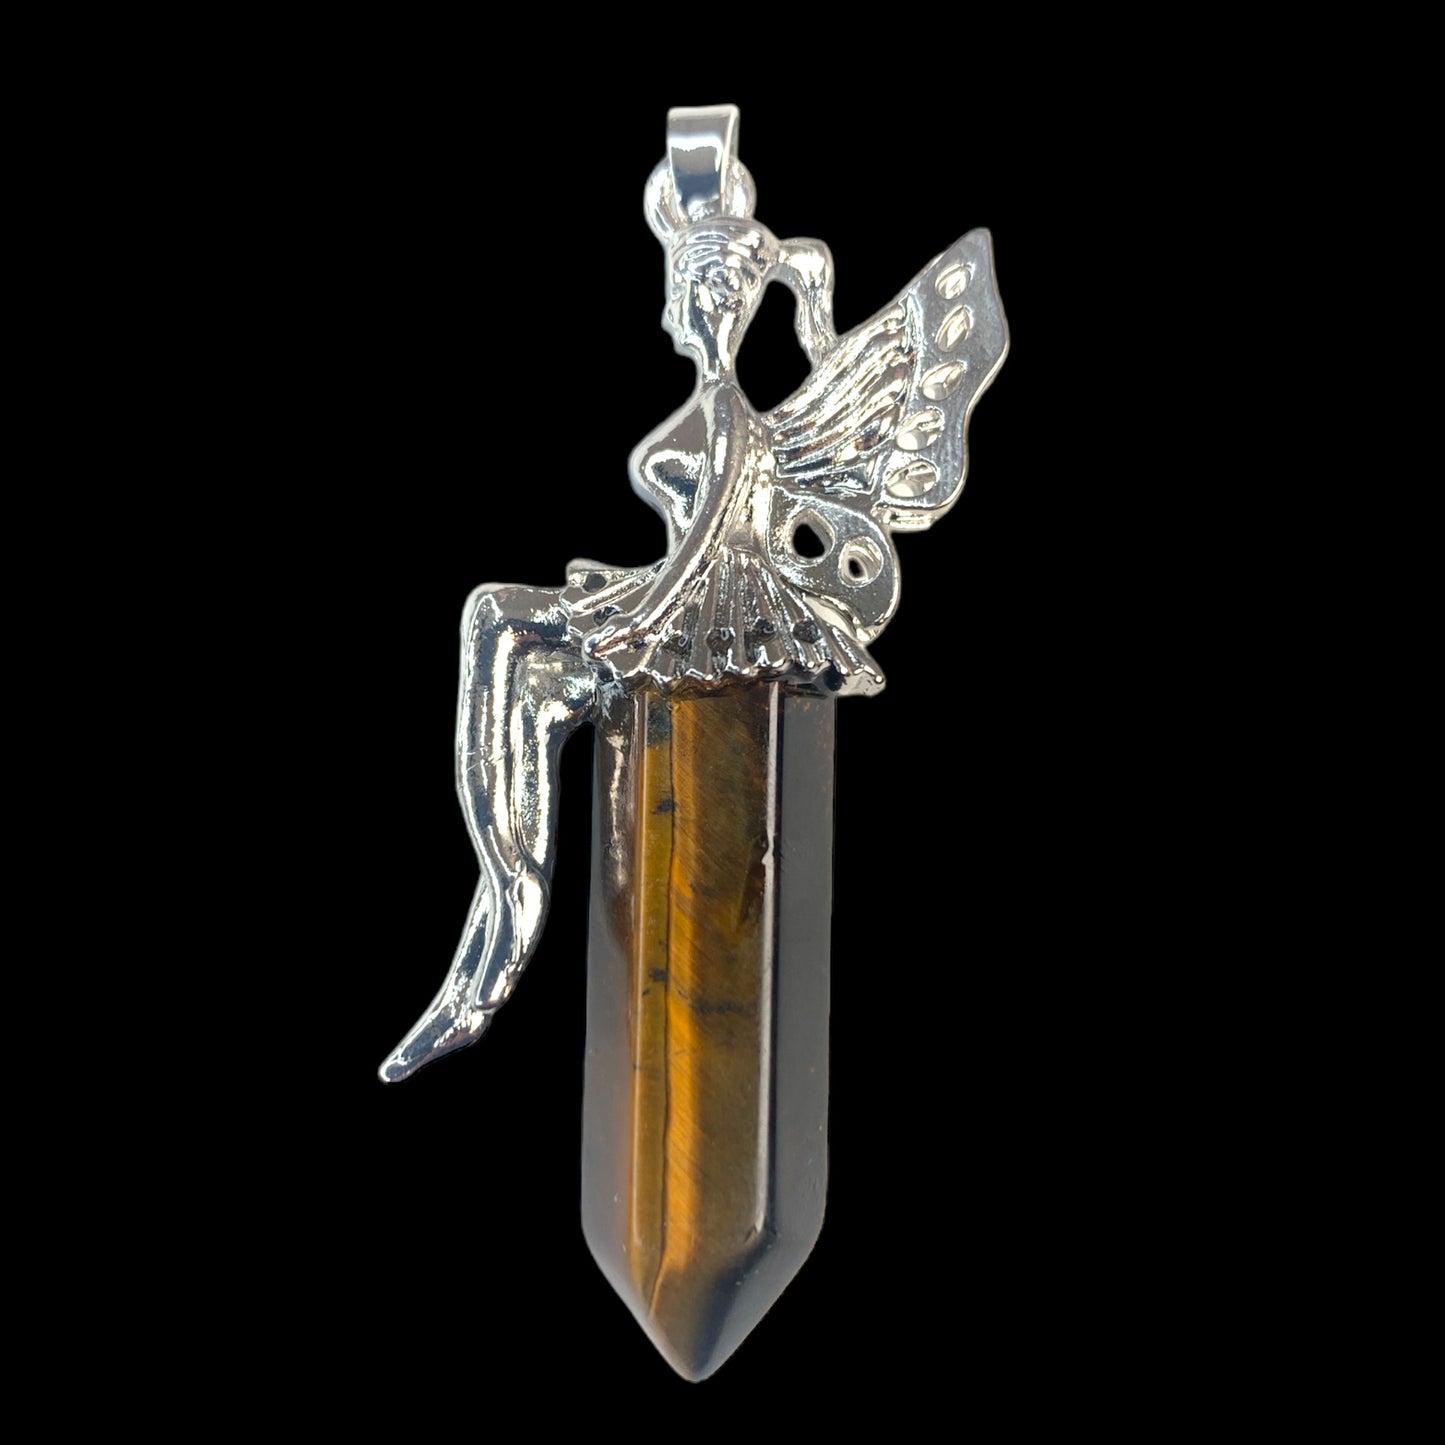 Fairy Design Terminated Pendant - Tigers Eye - Silver Color Plated Metal - 50mm - China - NEW1022